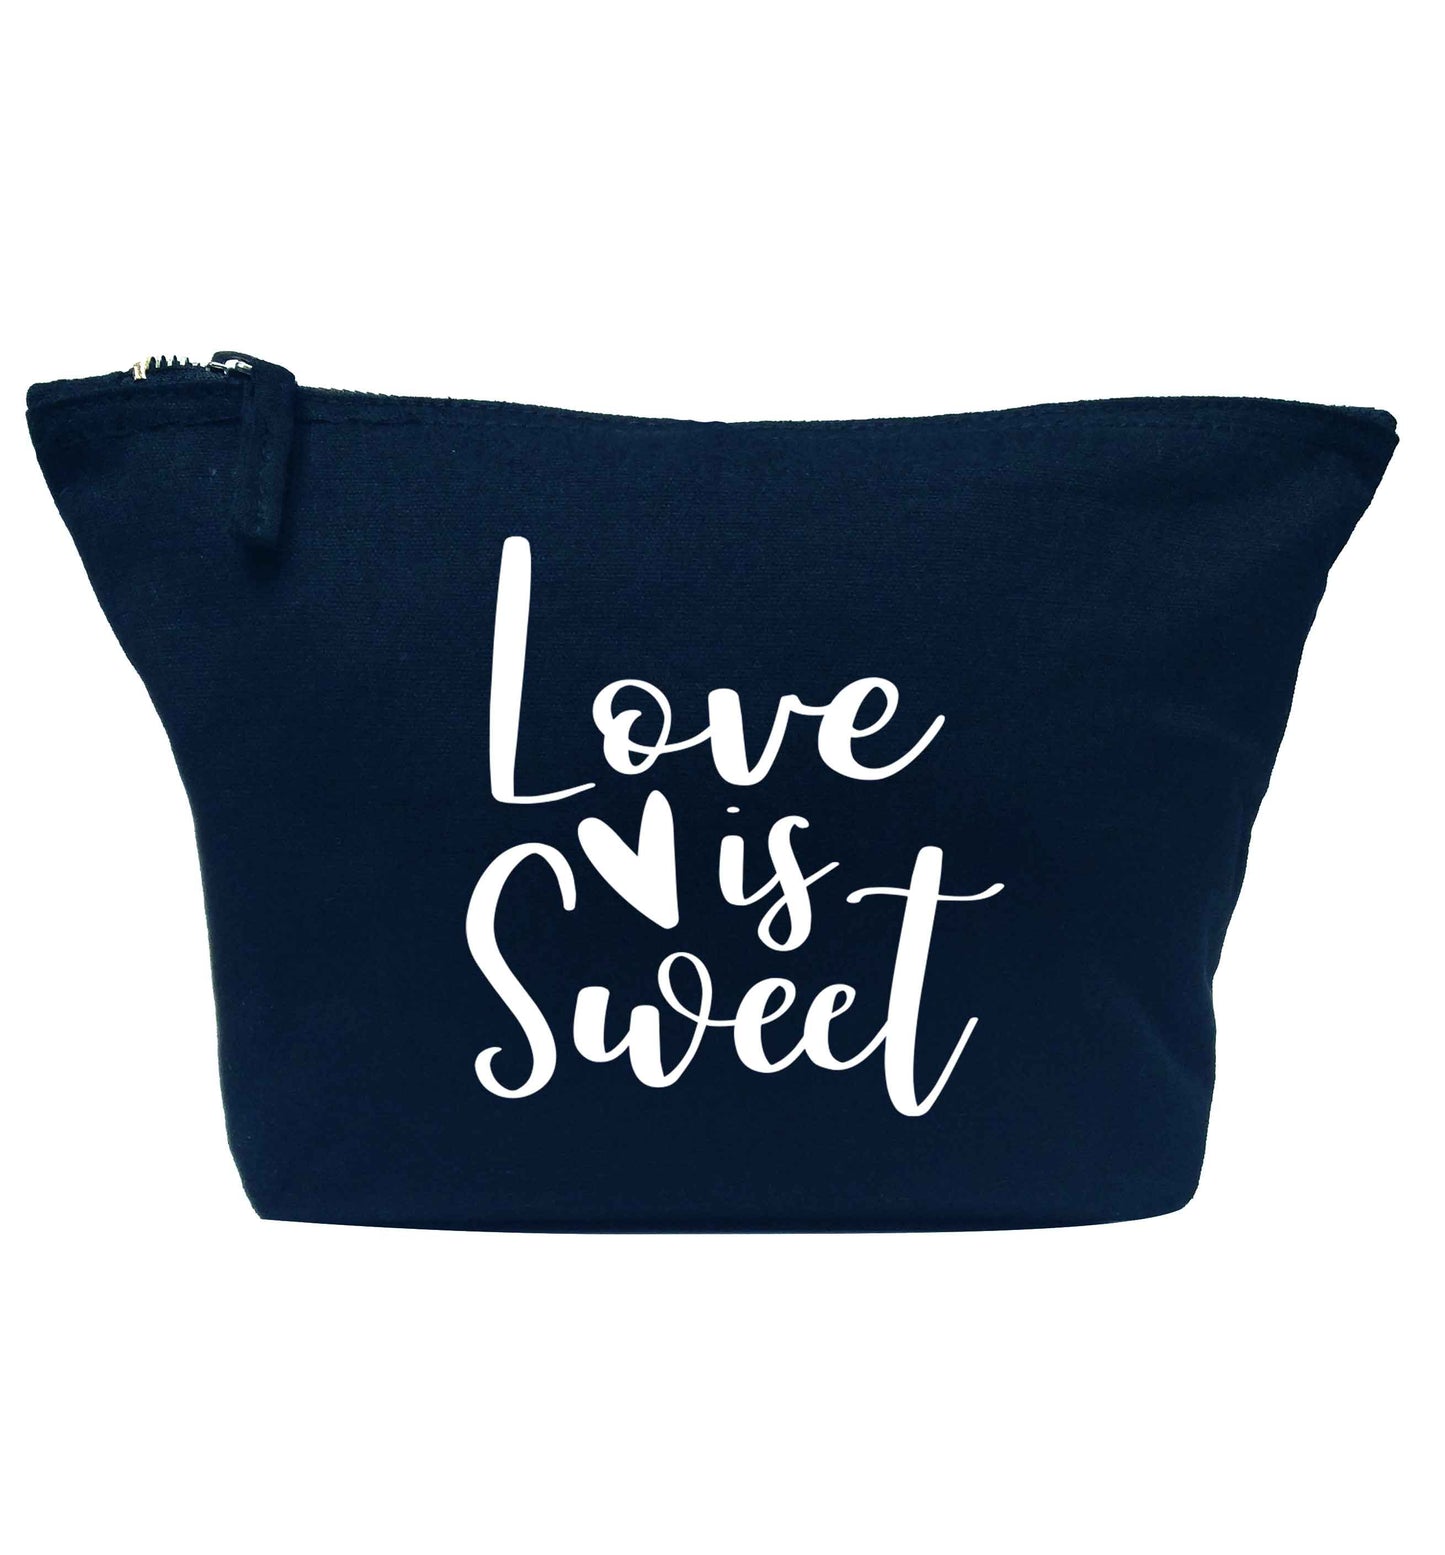 Love really does make the world go round! Ideal for weddings, valentines or just simply to show someone you love them!  navy makeup bag